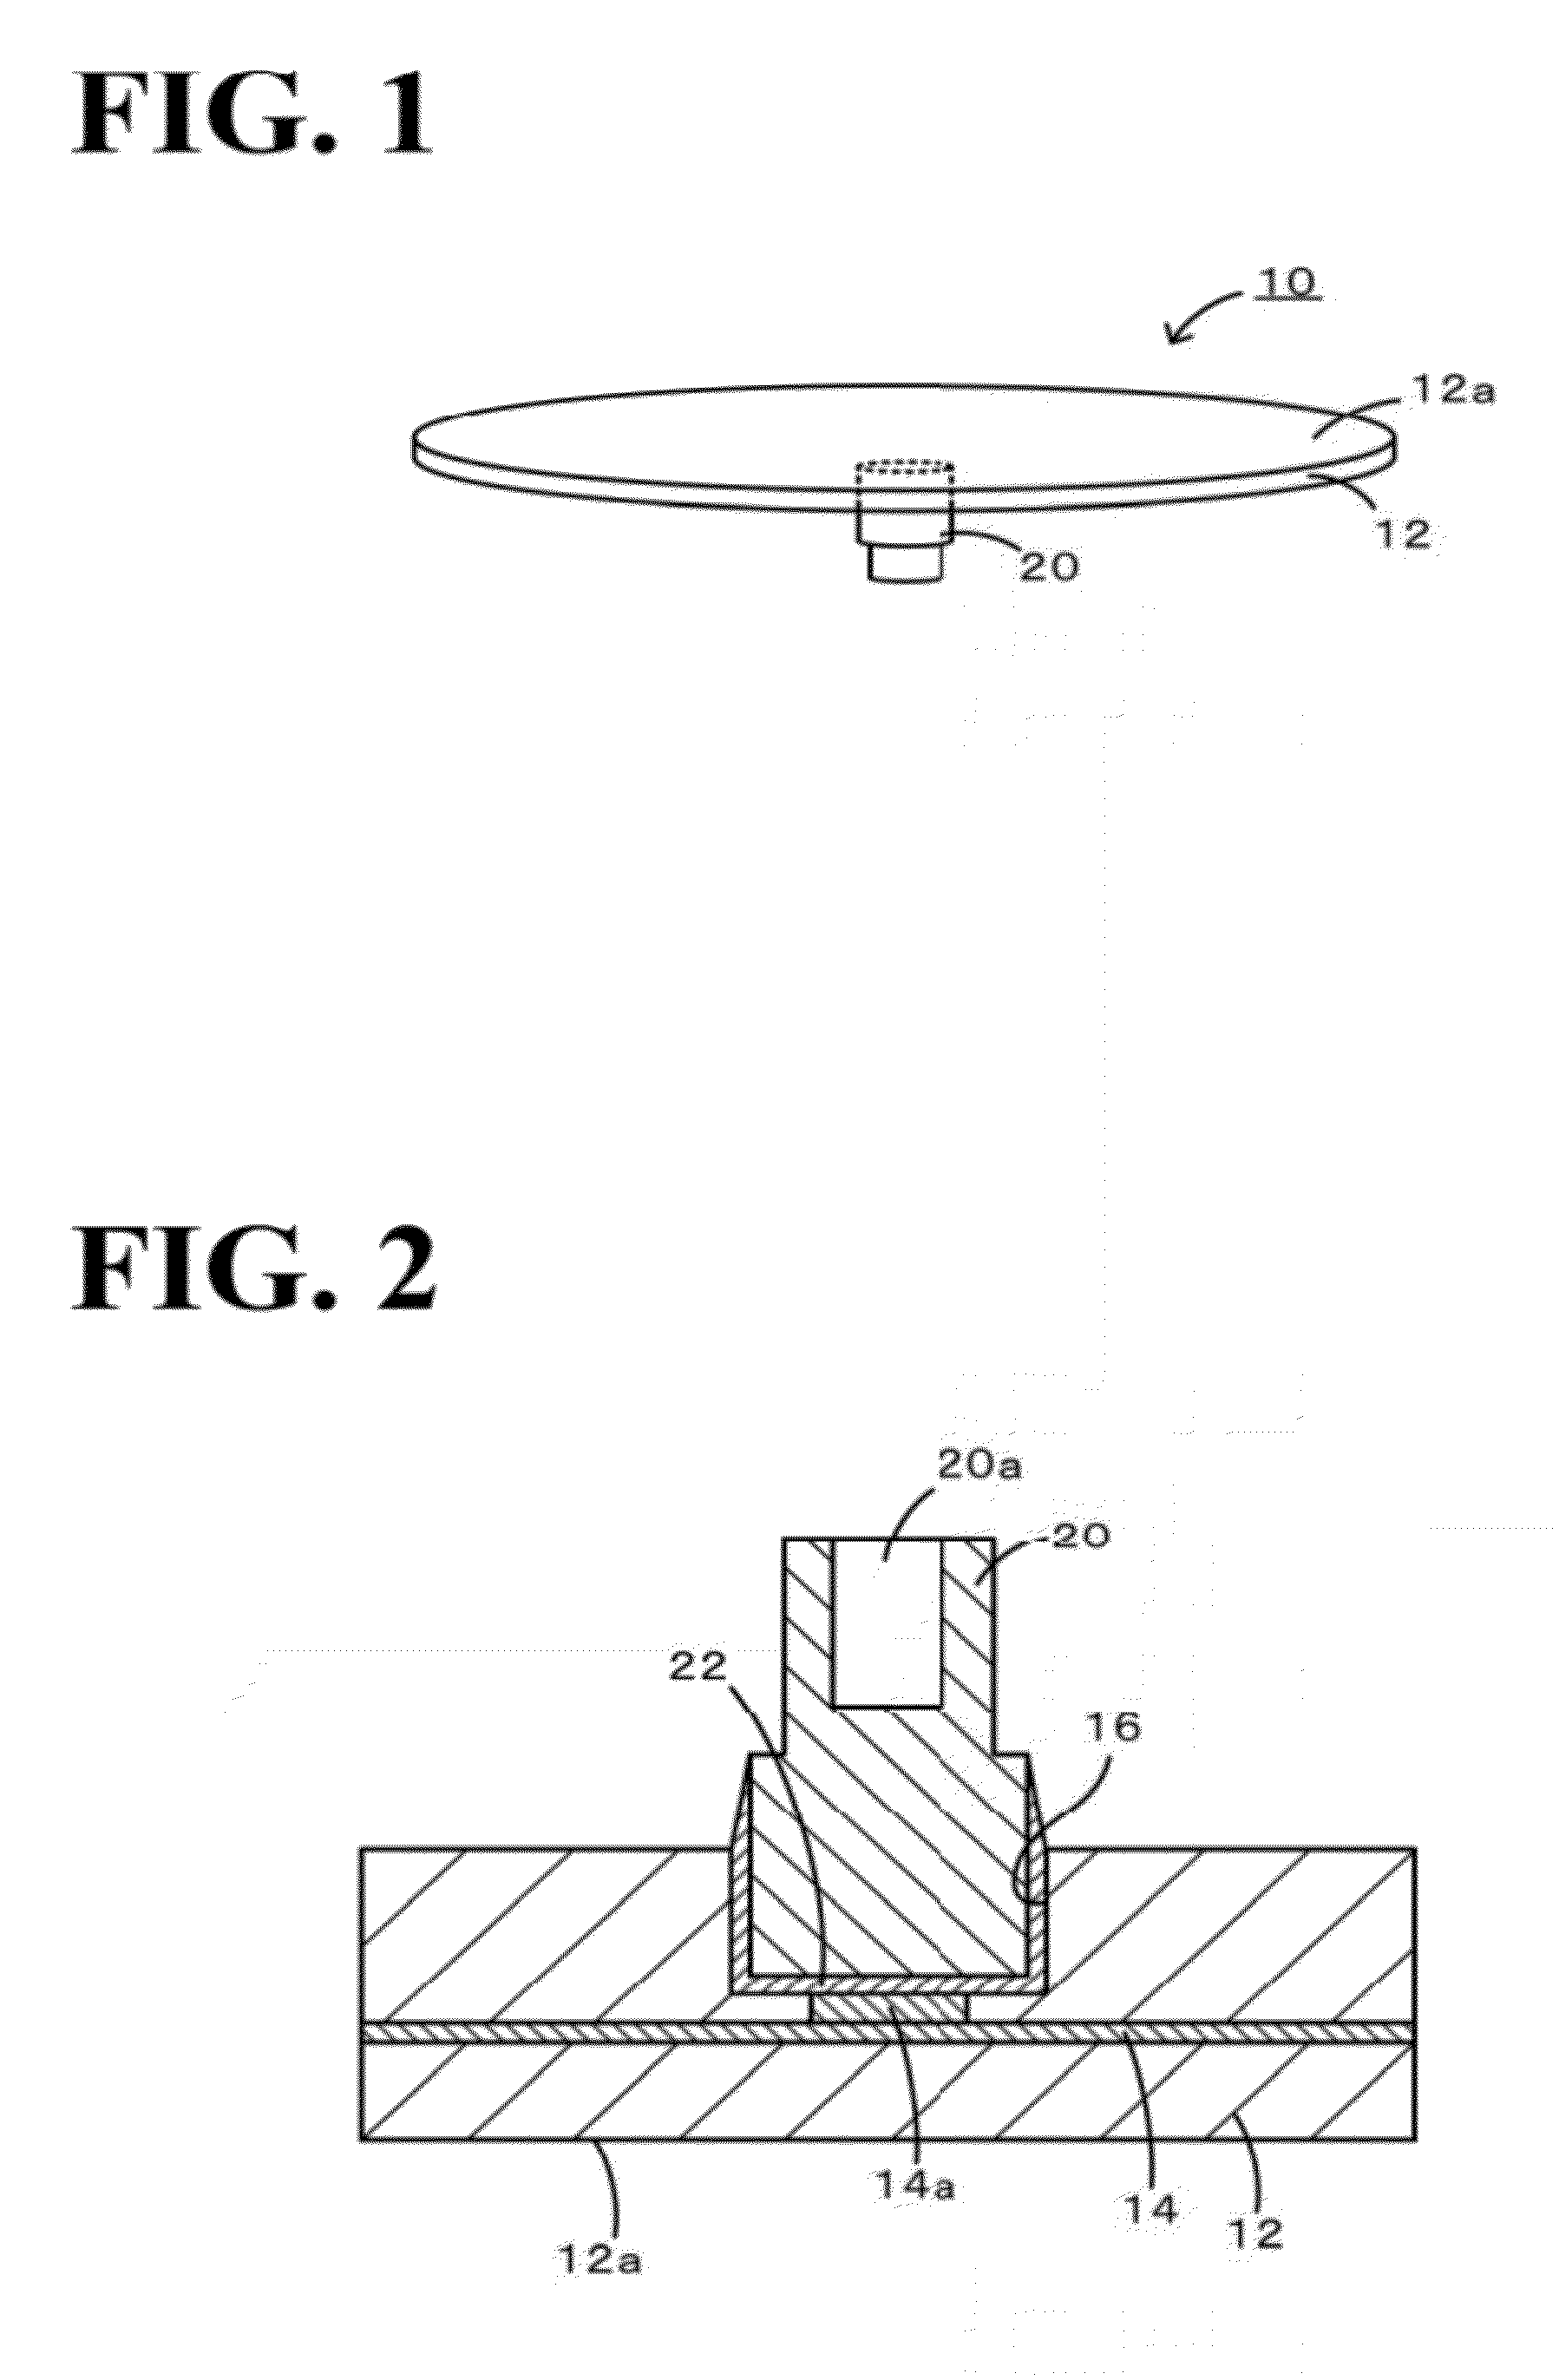 Member for semiconductor manufacturing apparatus